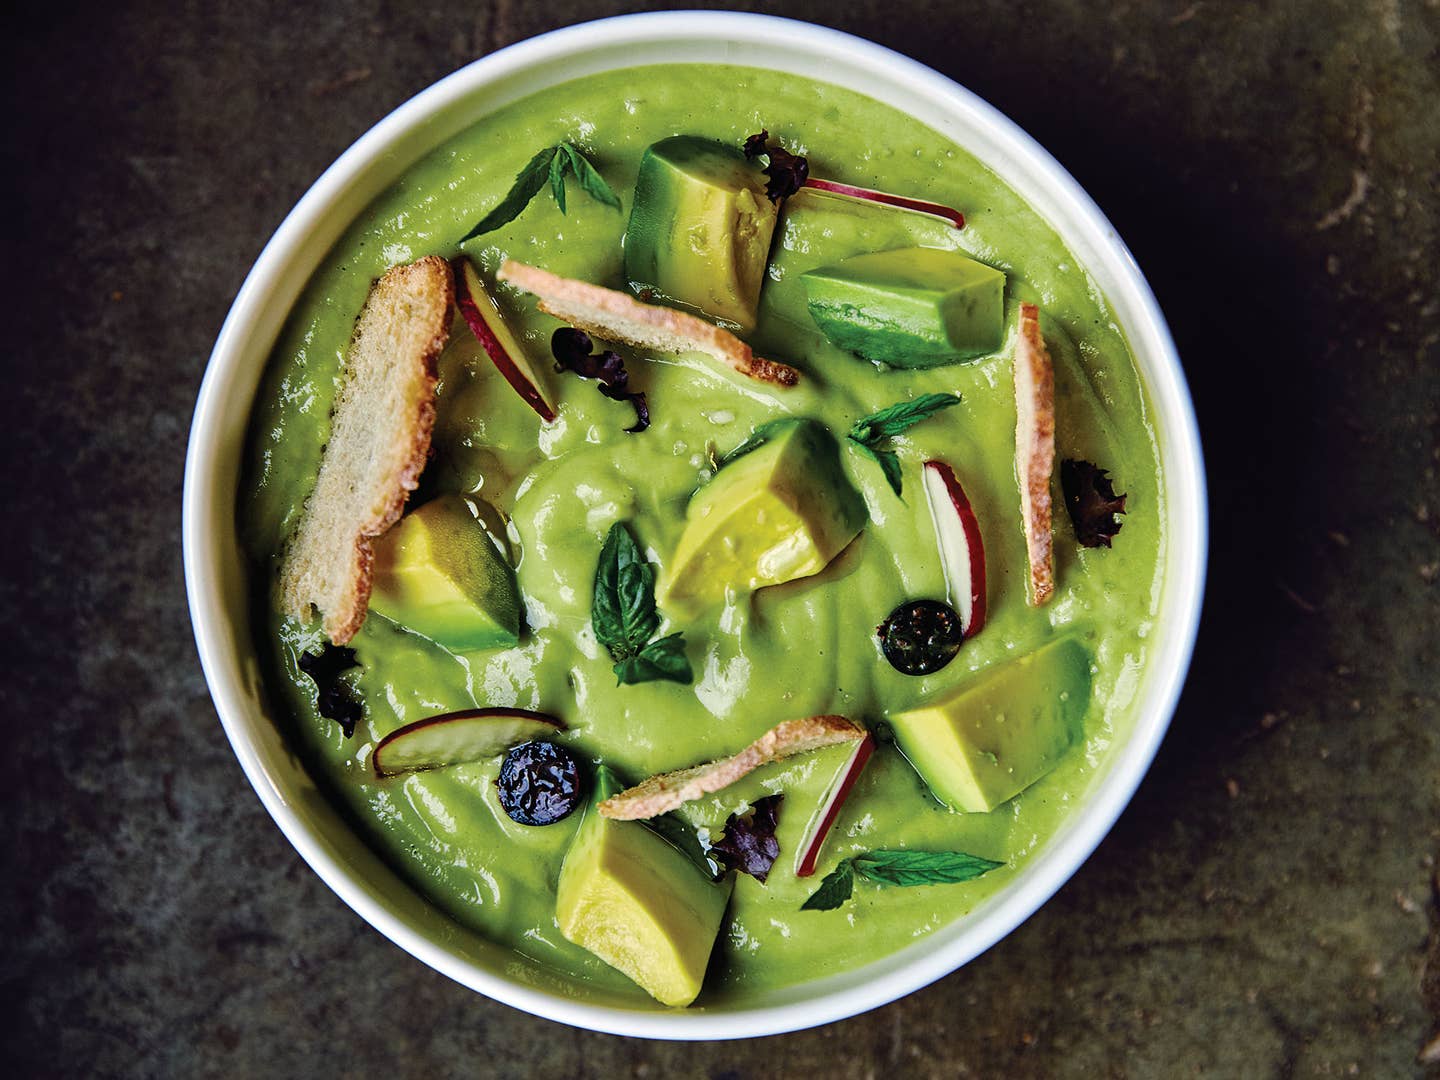 Our New Favorite Thing to Make With Avocado